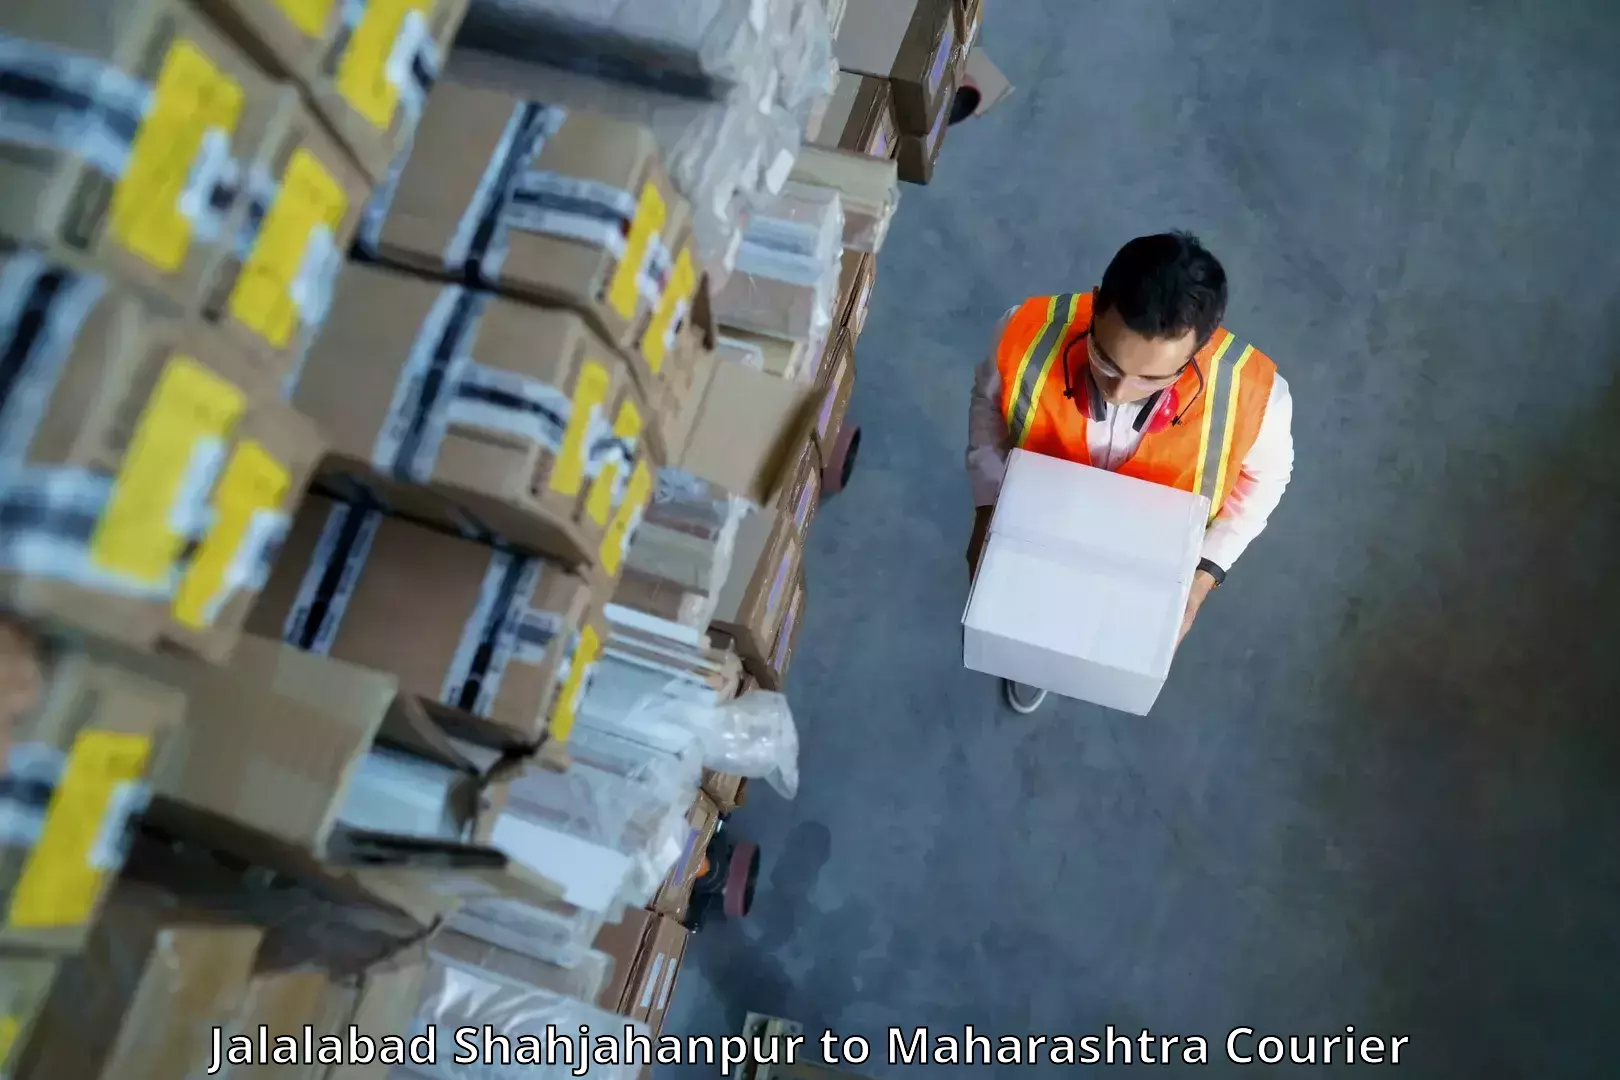 Easy access courier services Jalalabad Shahjahanpur to Navapur